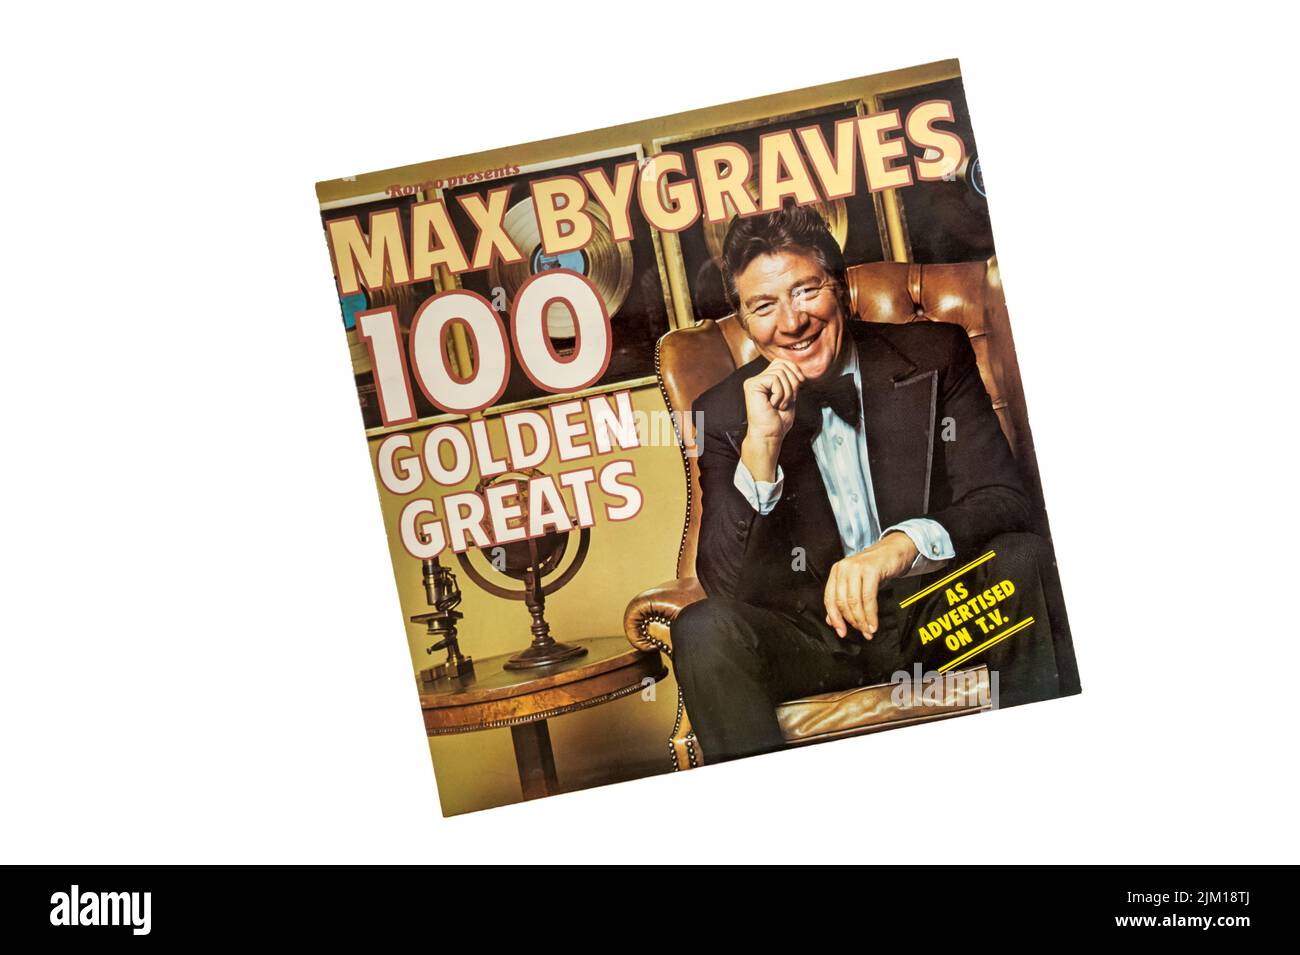 Max Bygraves 100 Golden Greats released by Ronco in 1976. Stock Photo